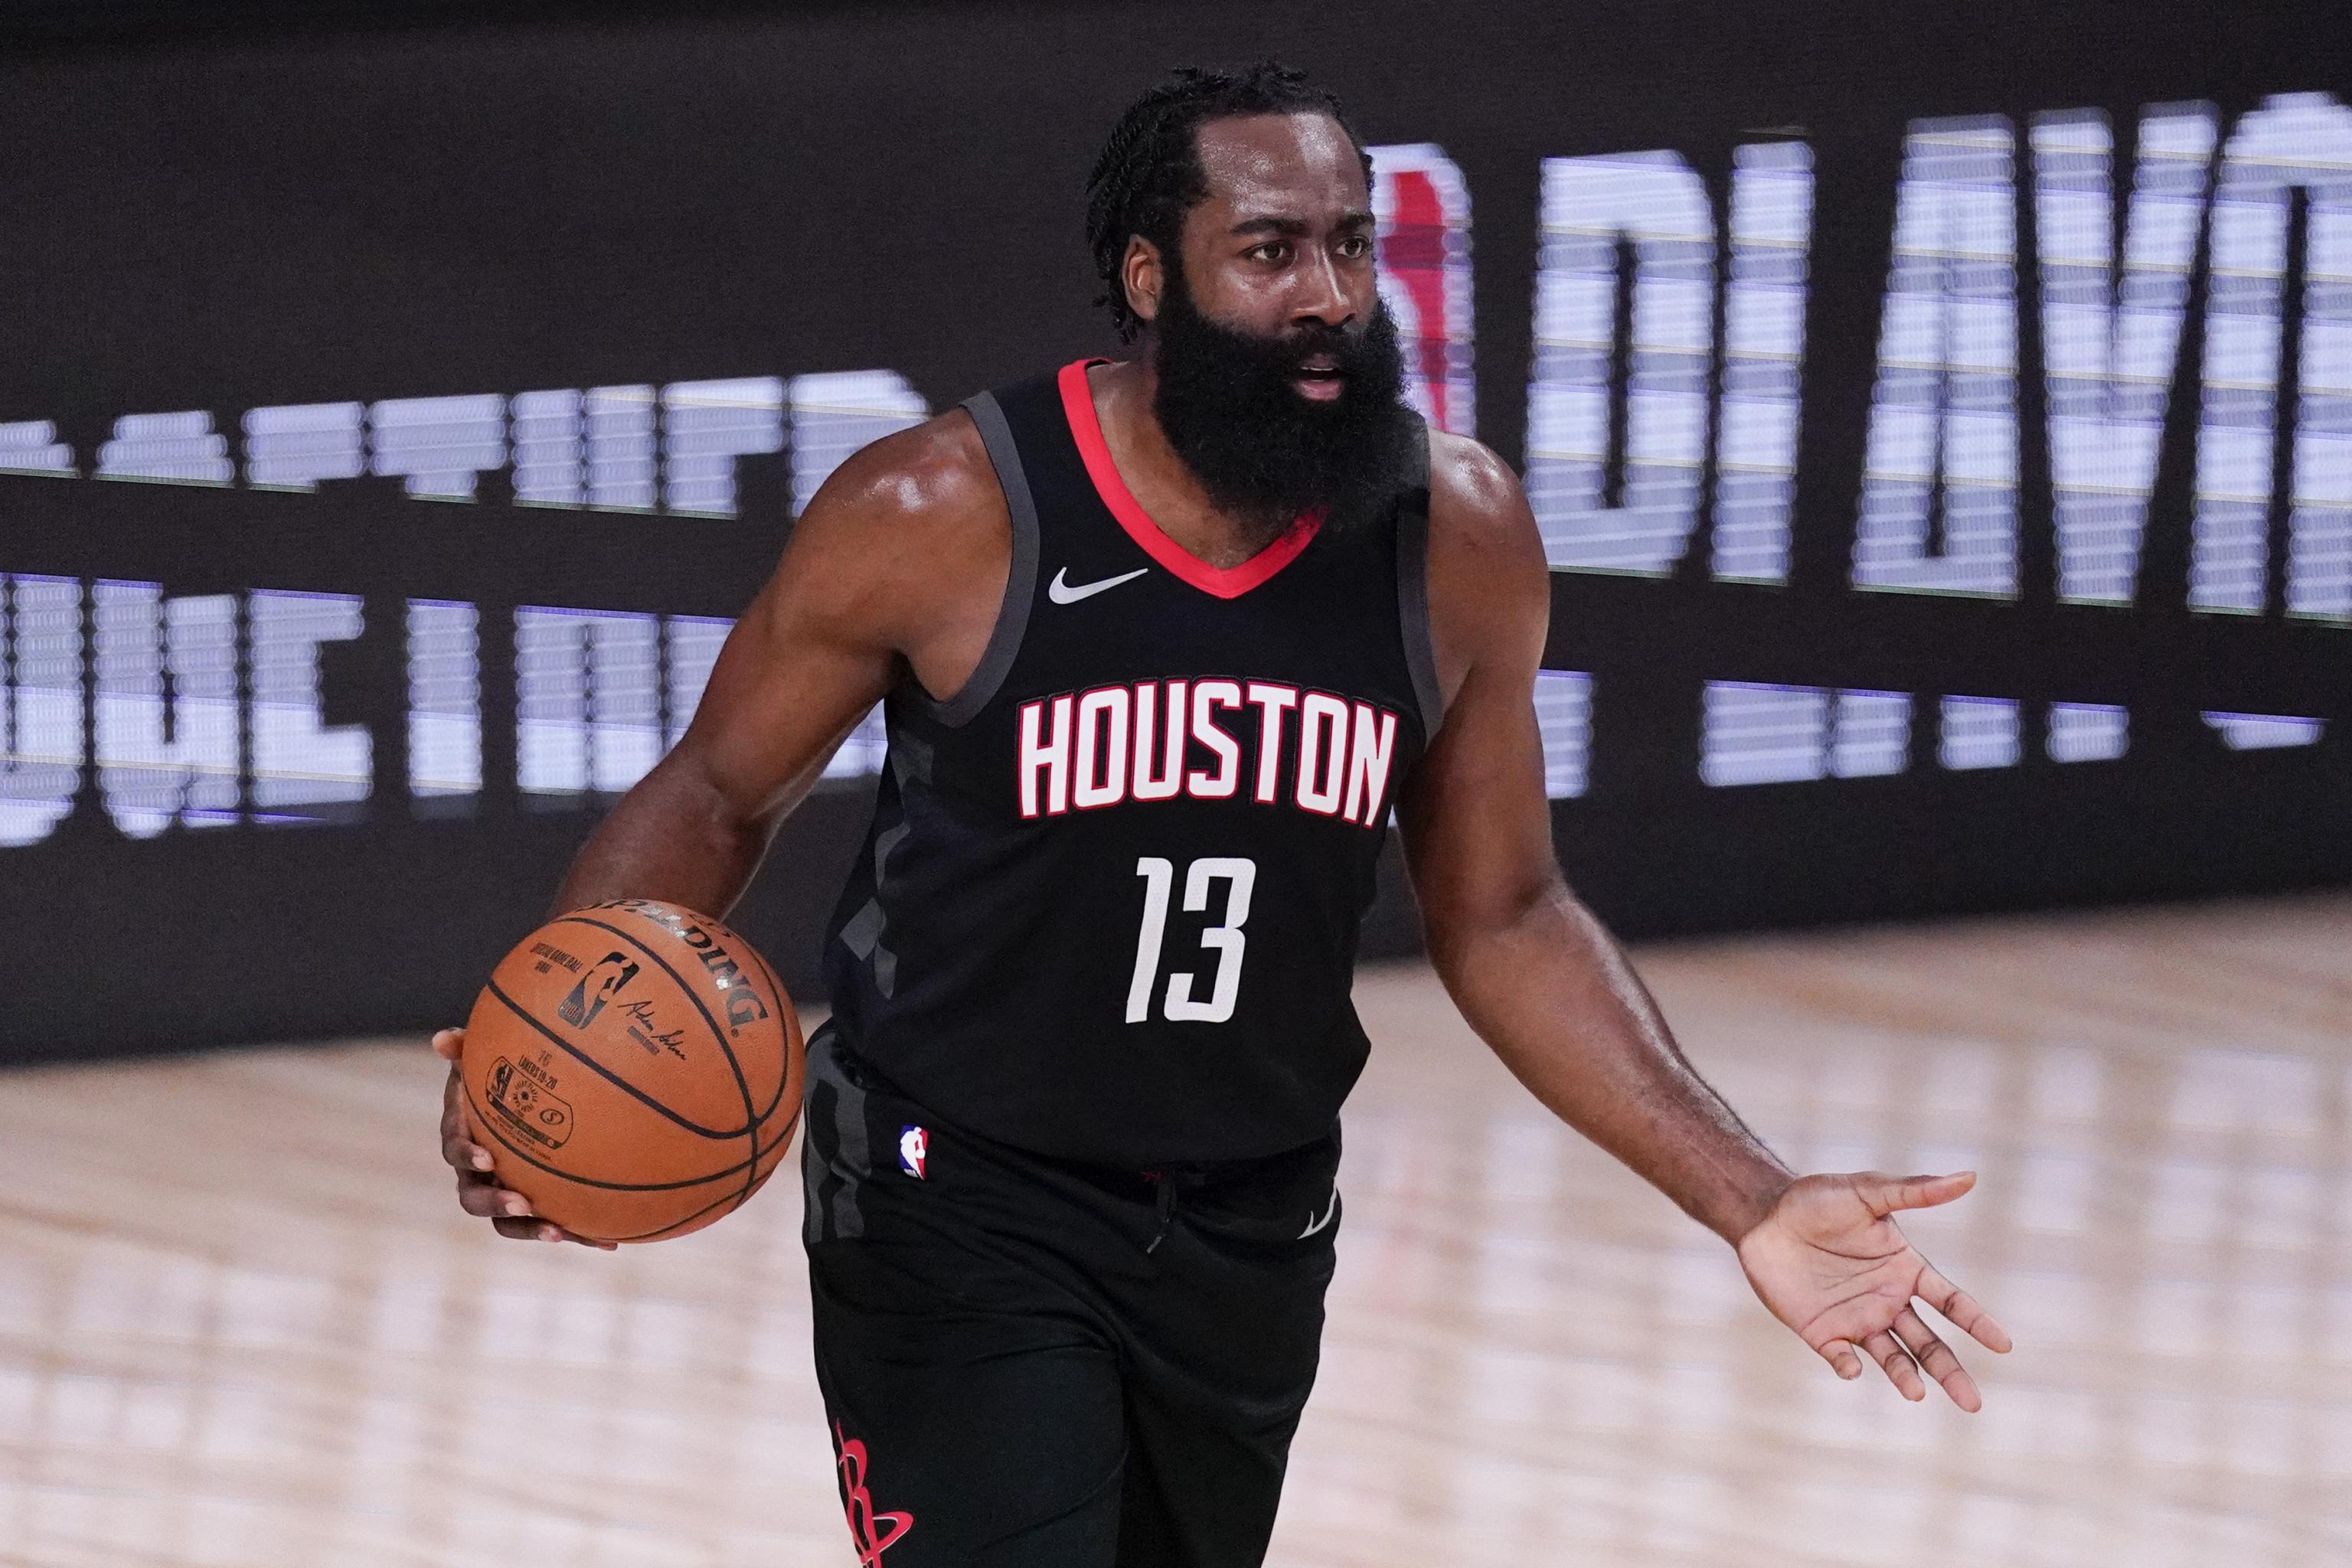 Fans react to Rockets star James Harden being traded to Brooklyn Nets; some  say they're relieved